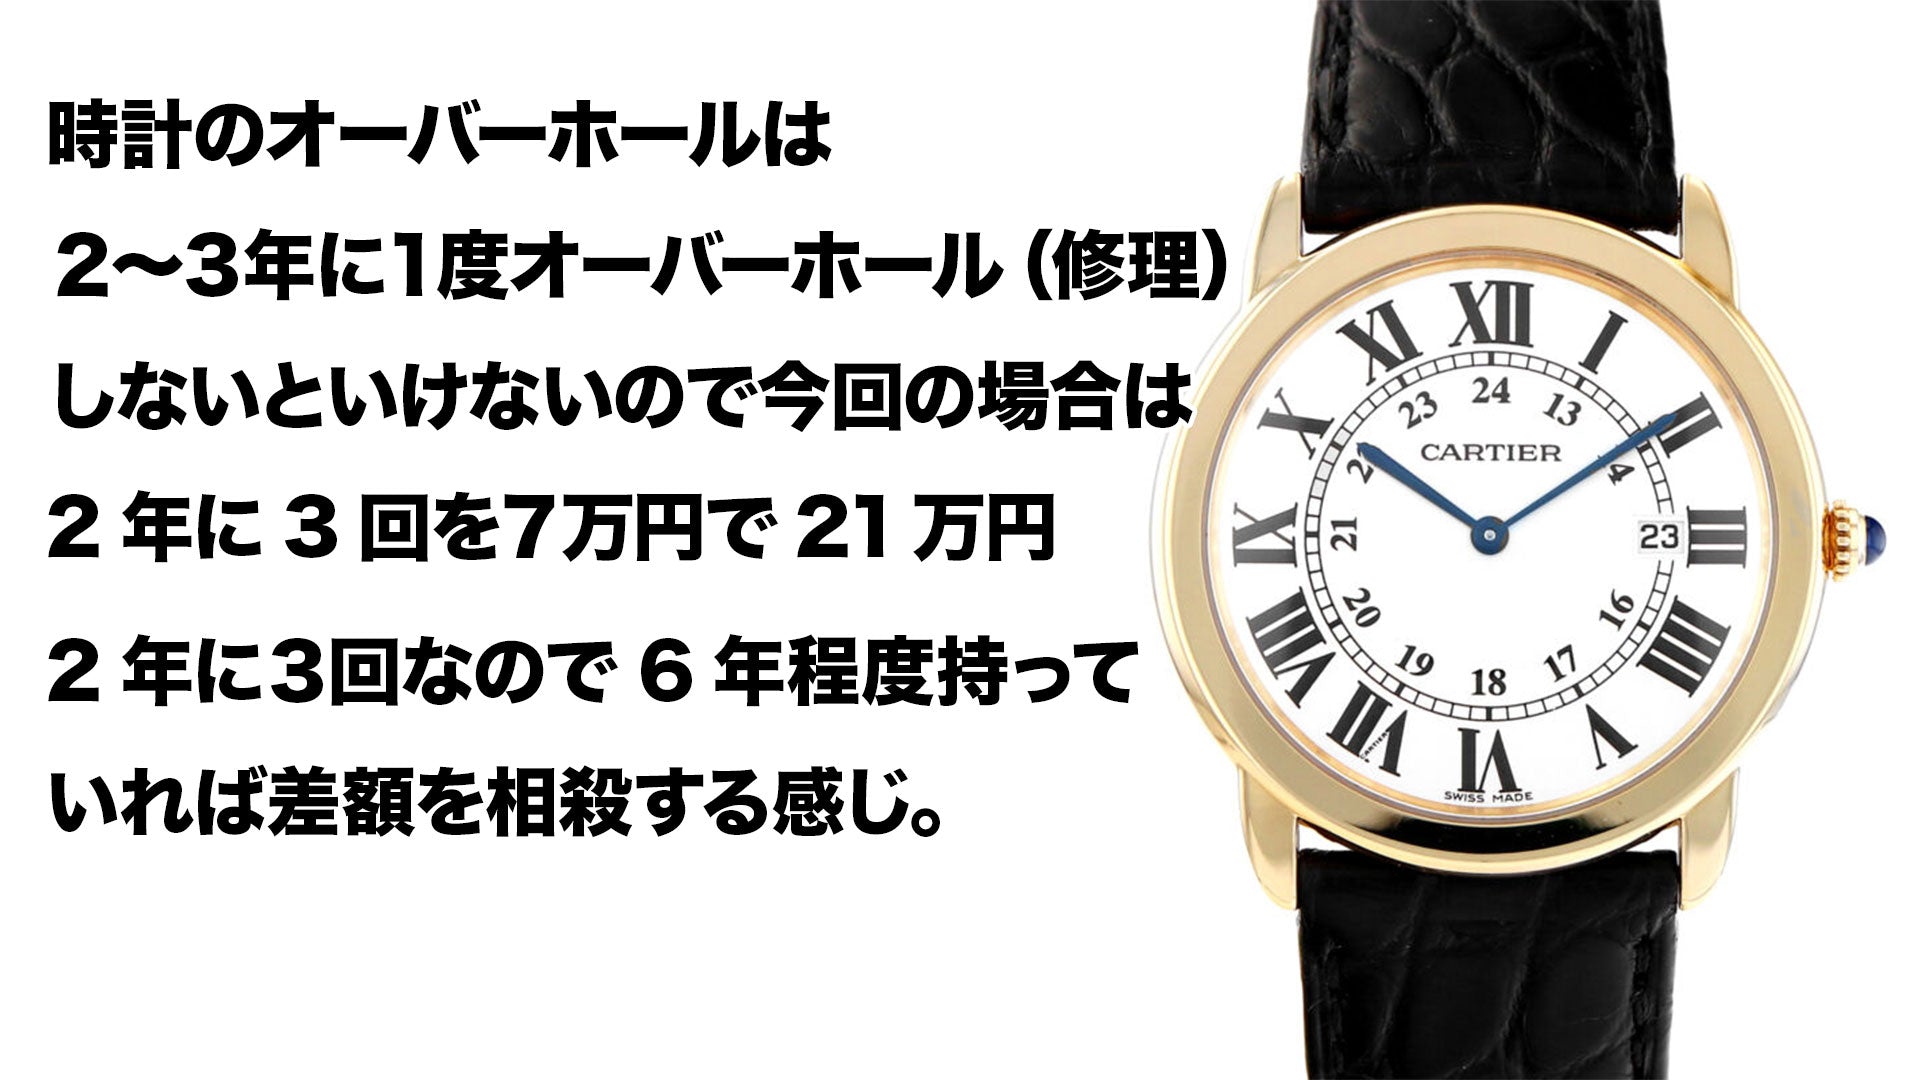 Simulation with Cartier warranty